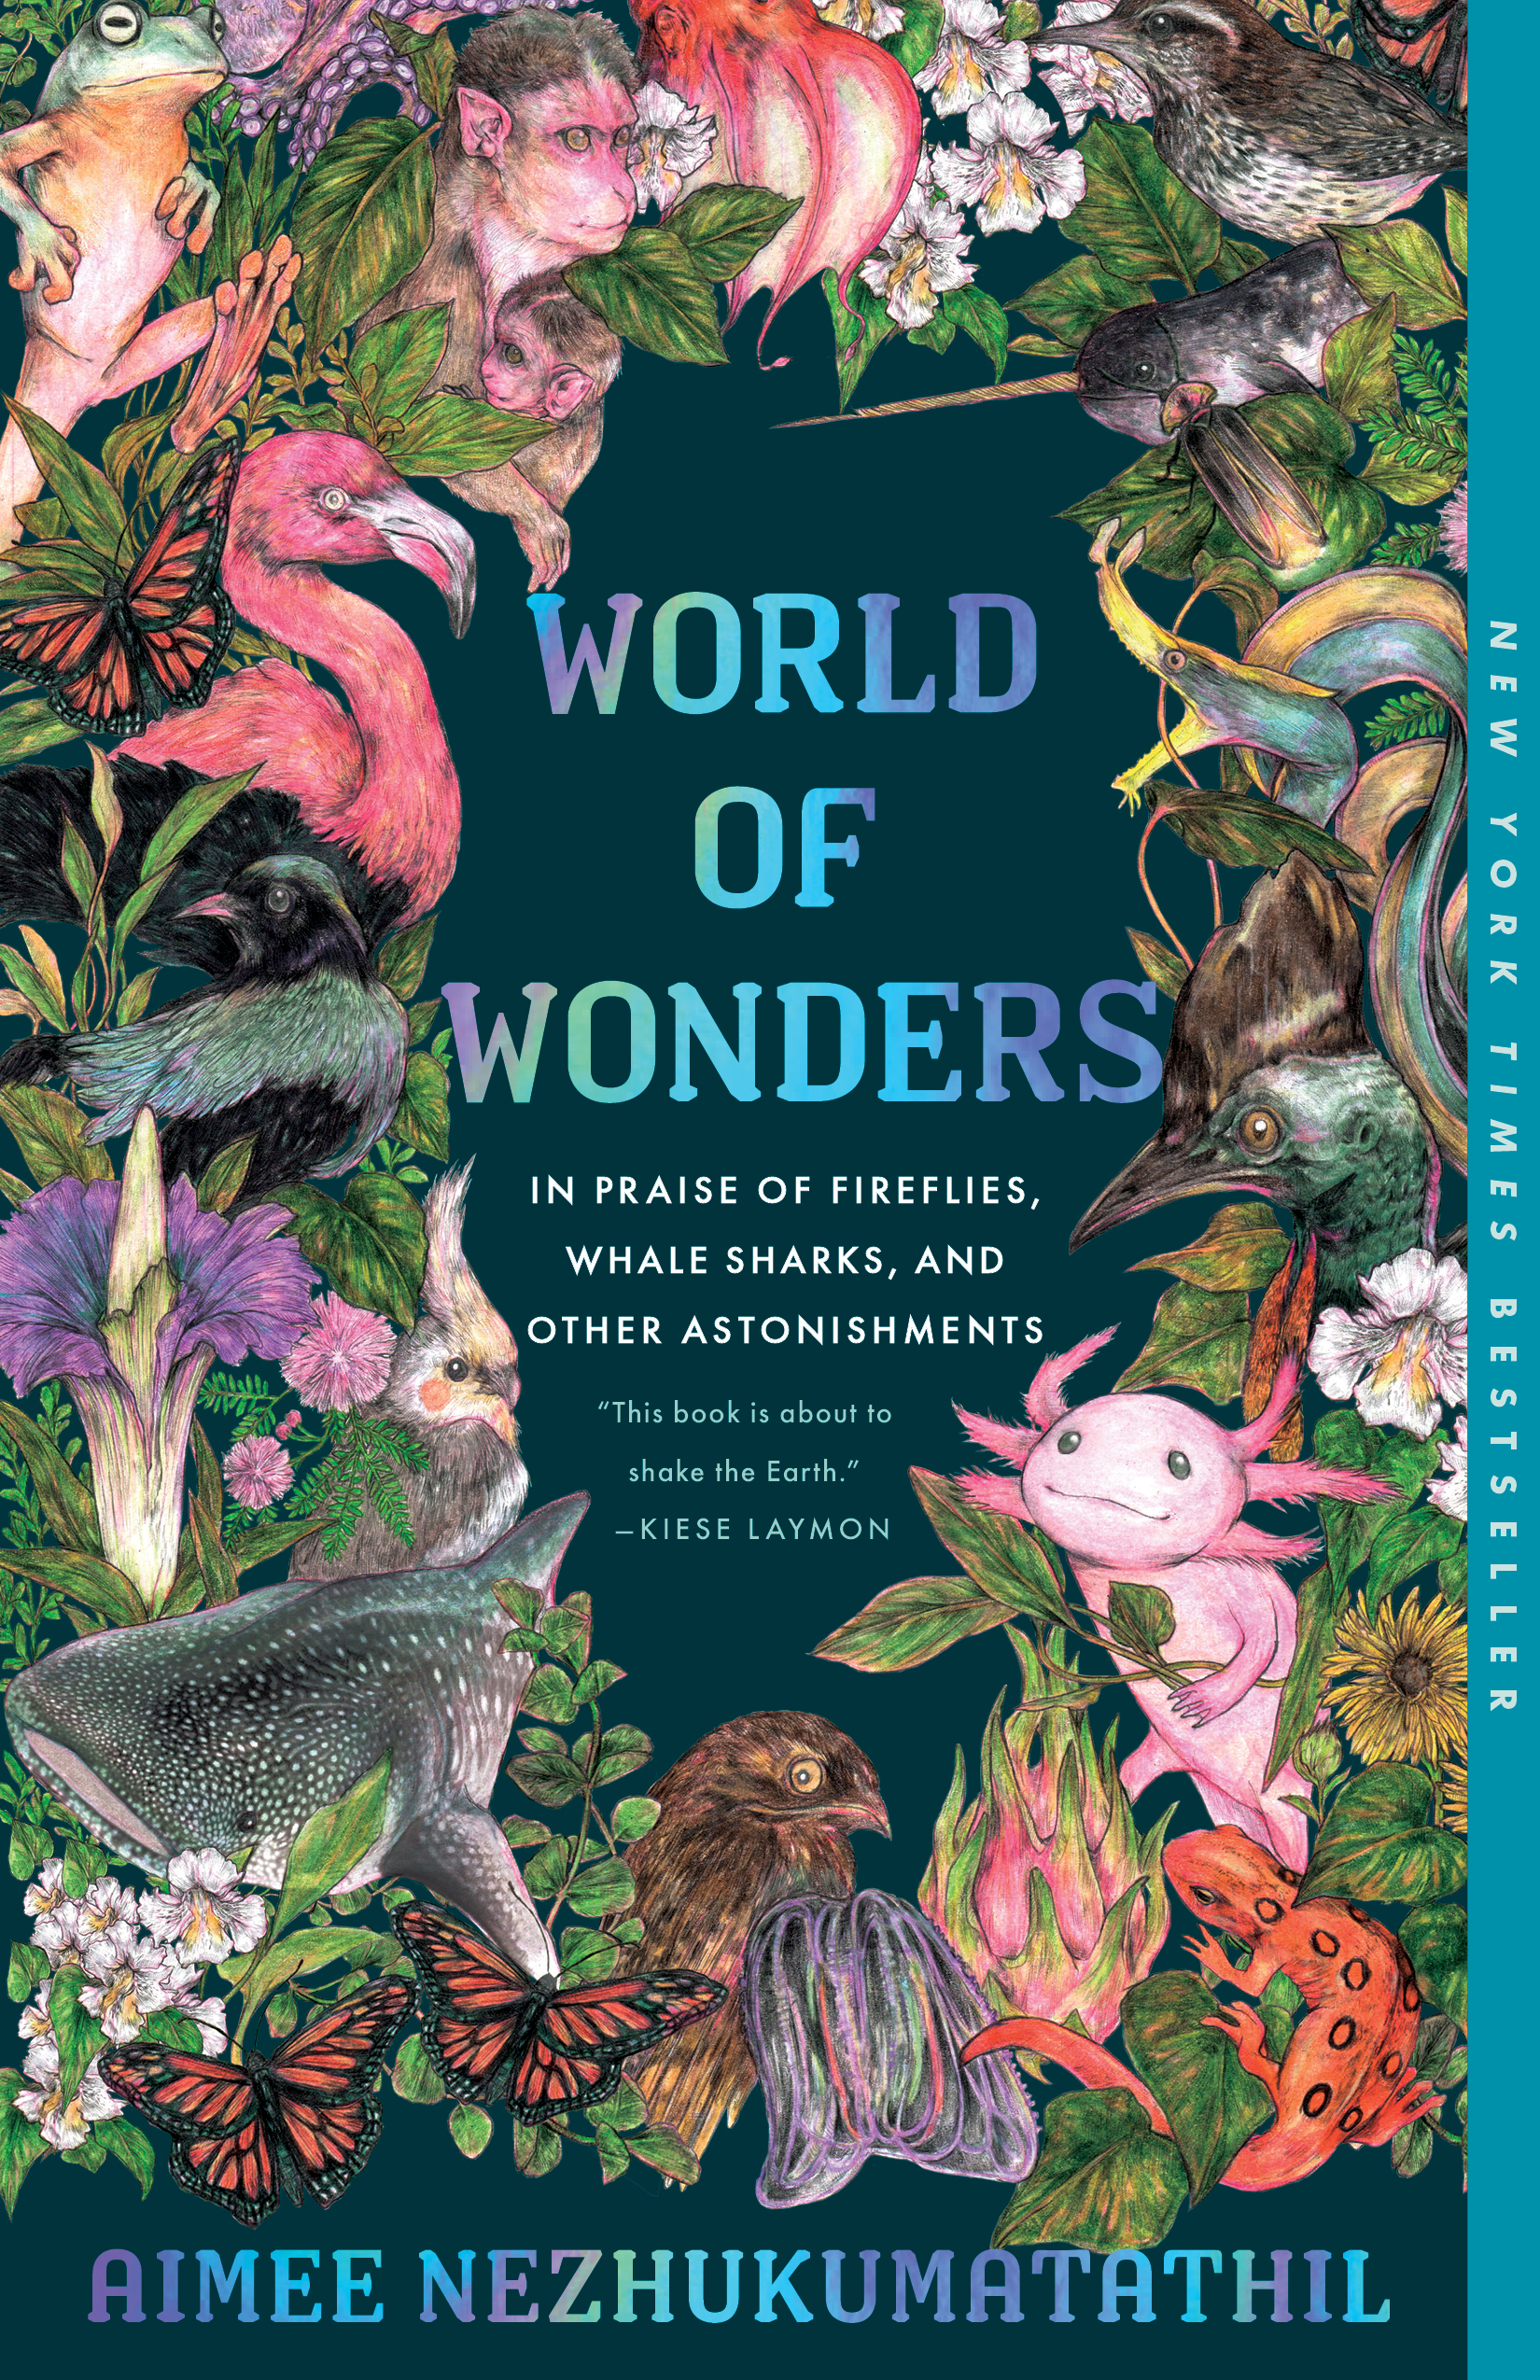 The Earth Book: A world of exploration and wonder